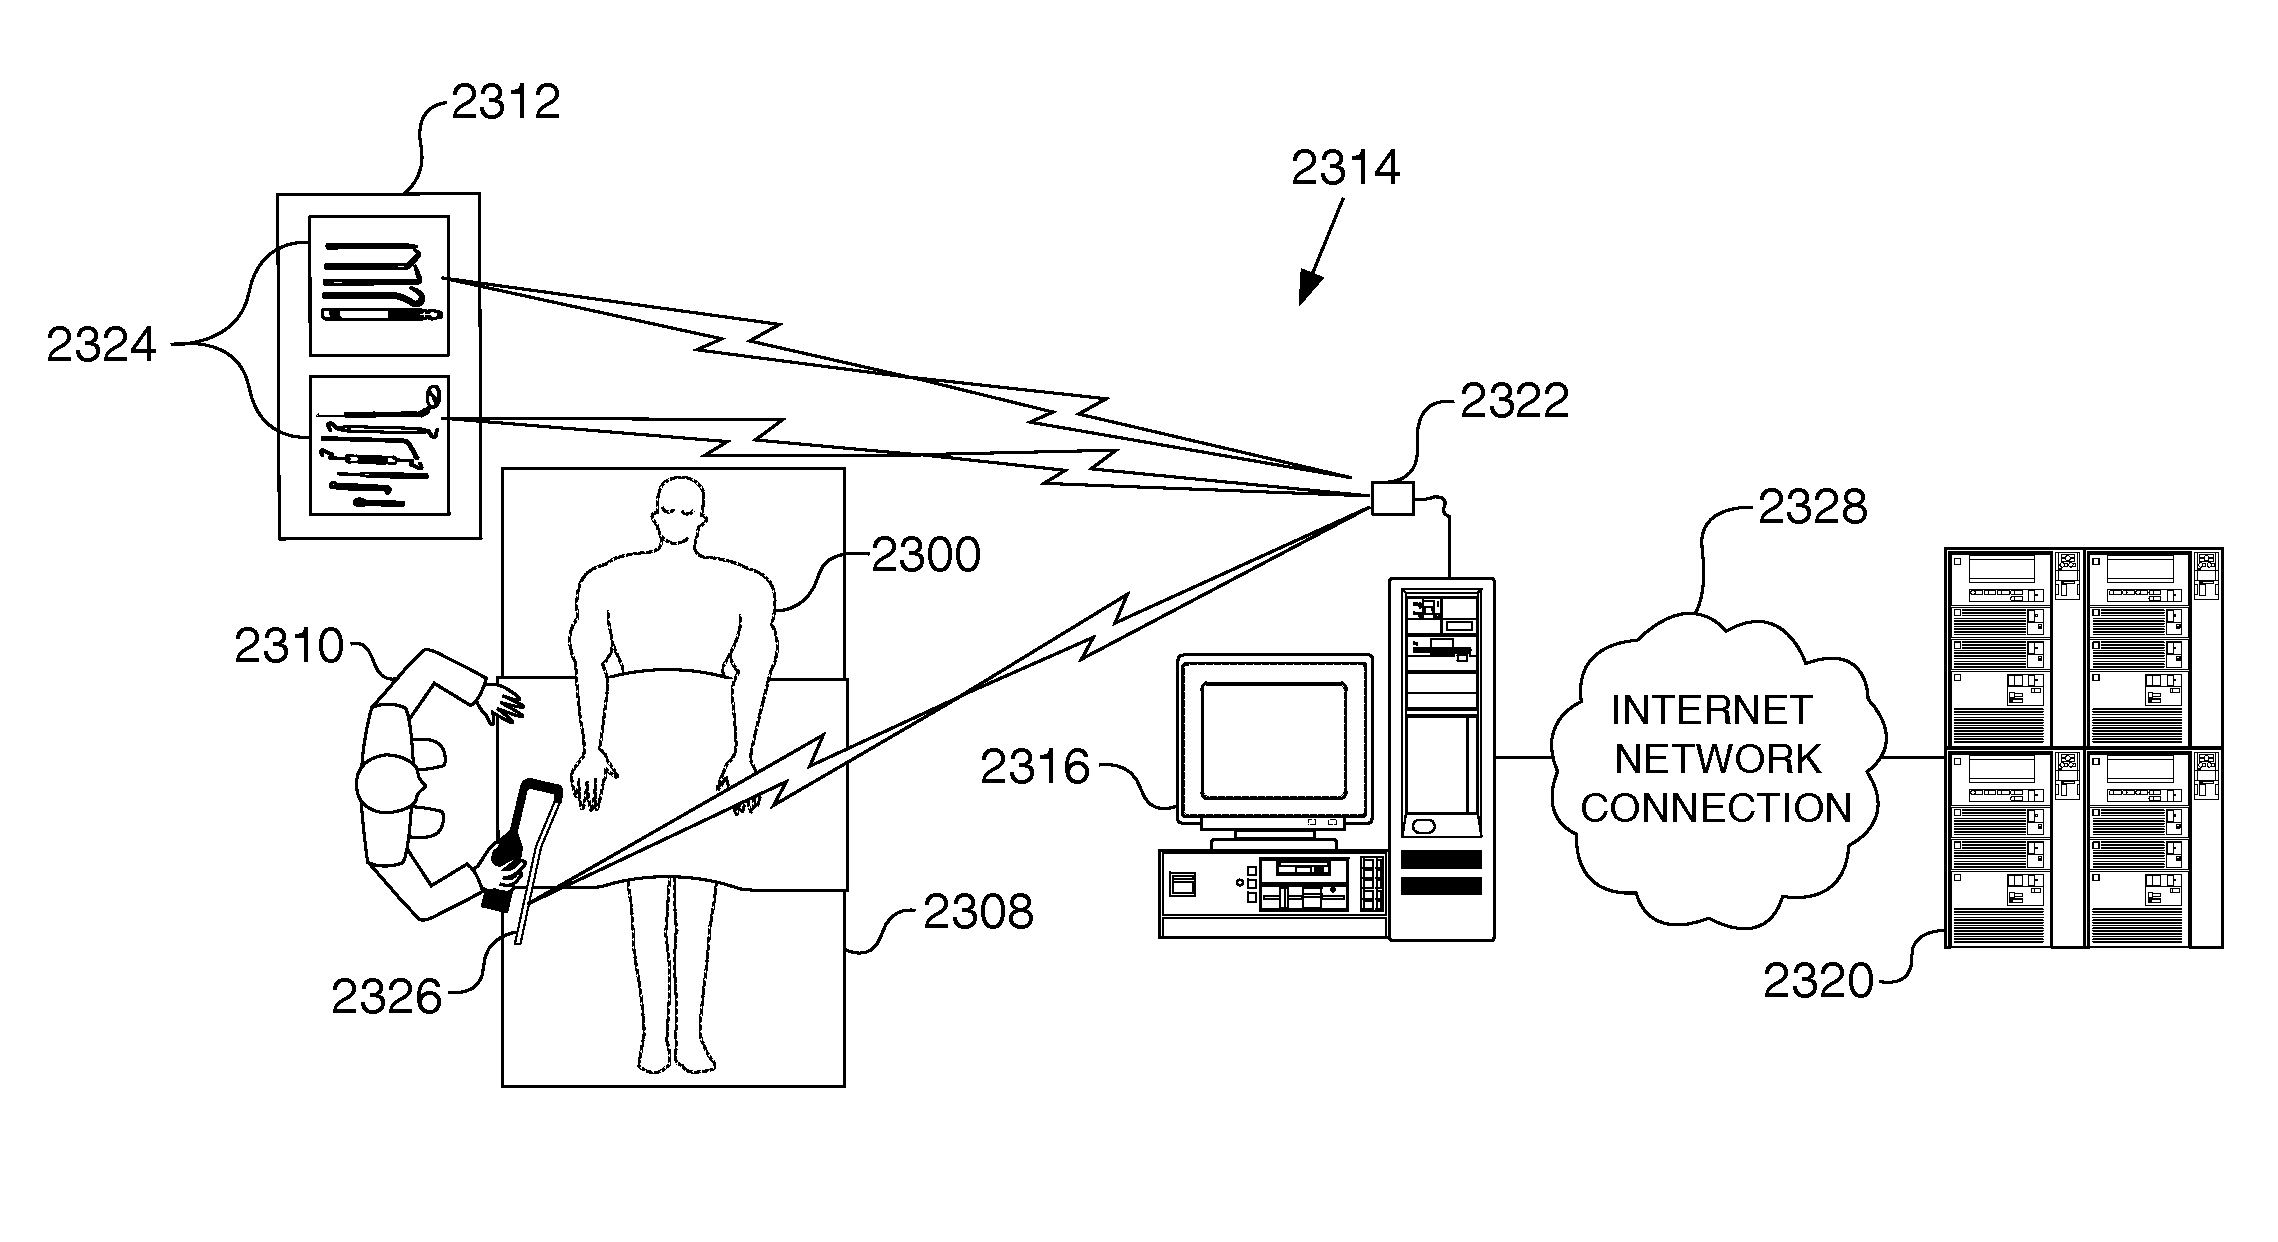 System and method for tracking surgical assets